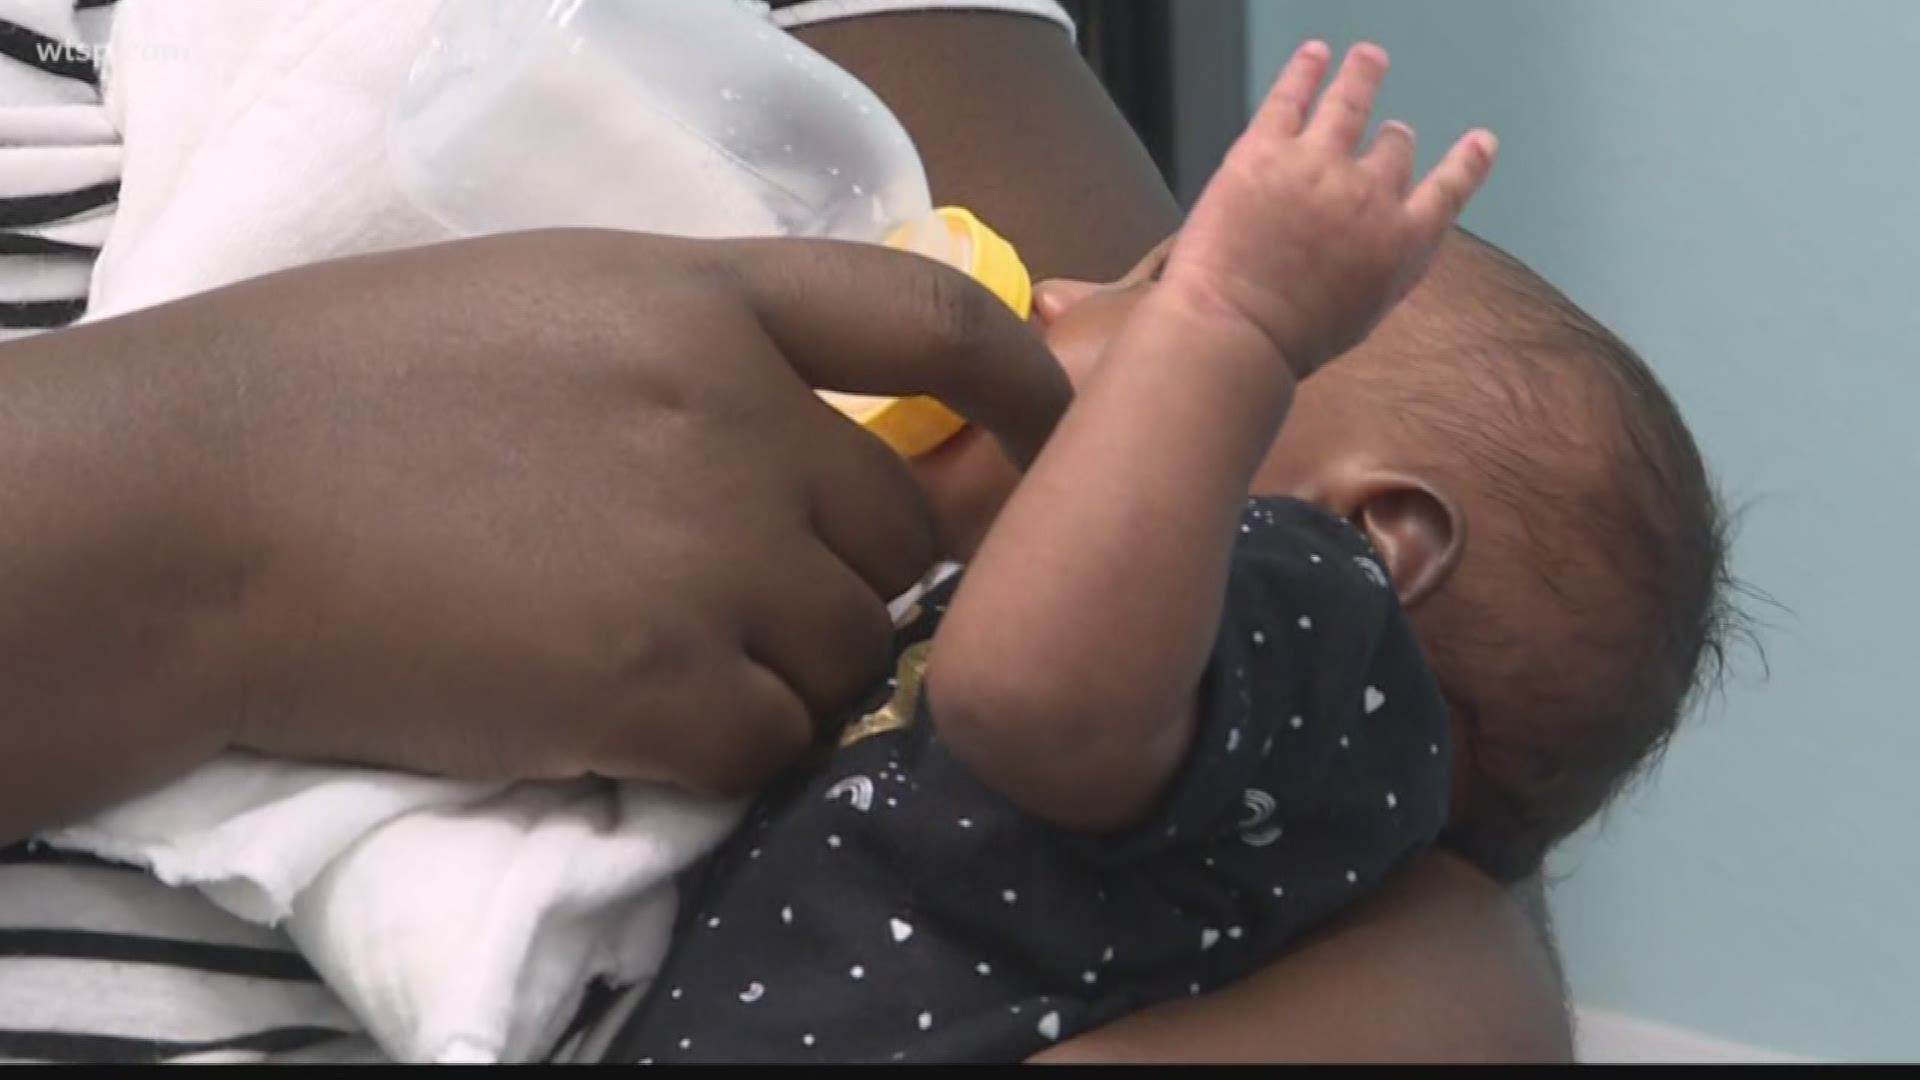 10Investigates looked into the snips, clips and lasers affecting babies in the Tampa Bay area.